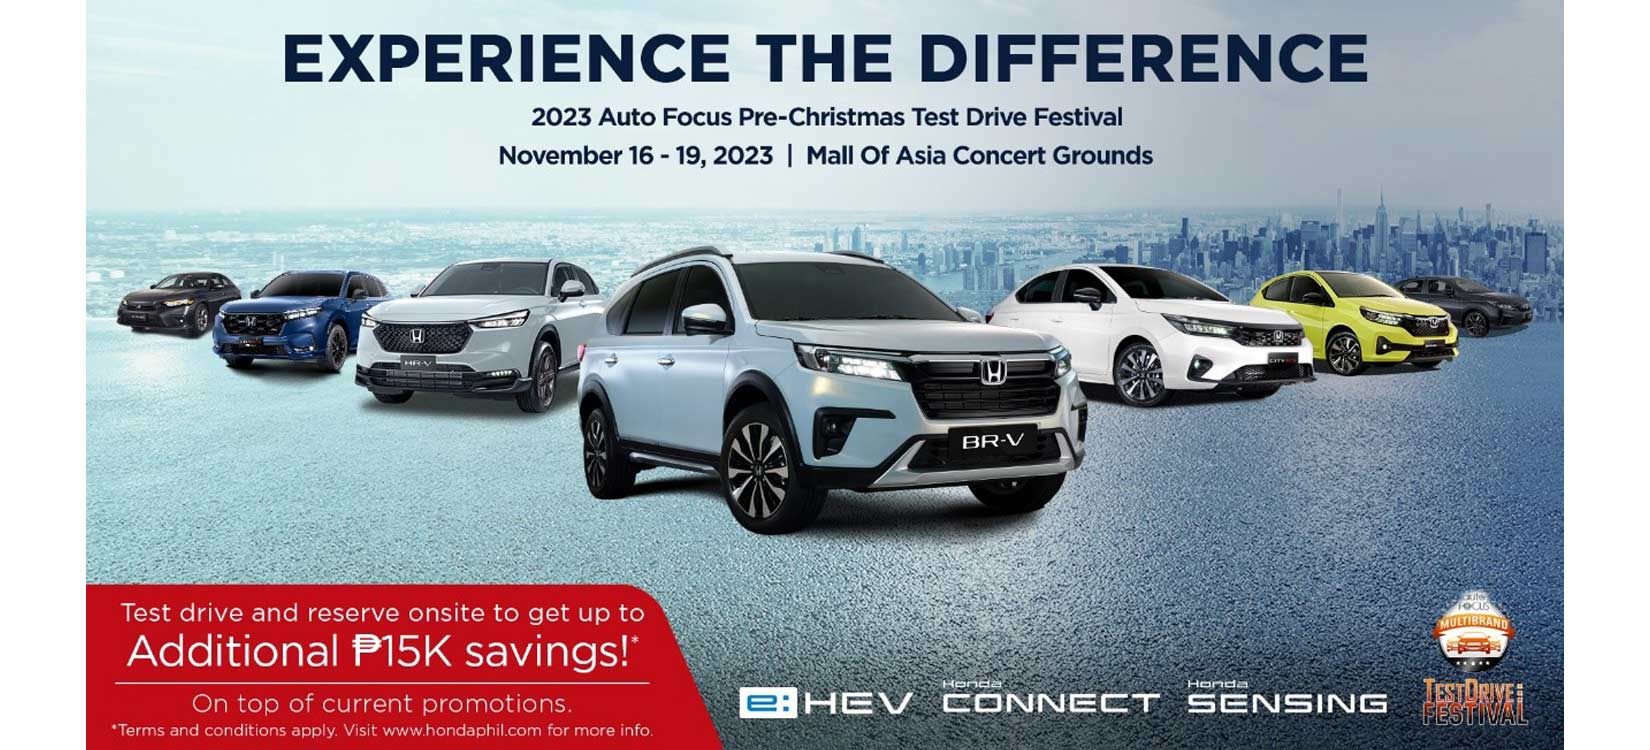 Experience the difference: Test Drive Your Favorite Honda car at the  Auto Focus Pre-Christmas Festival